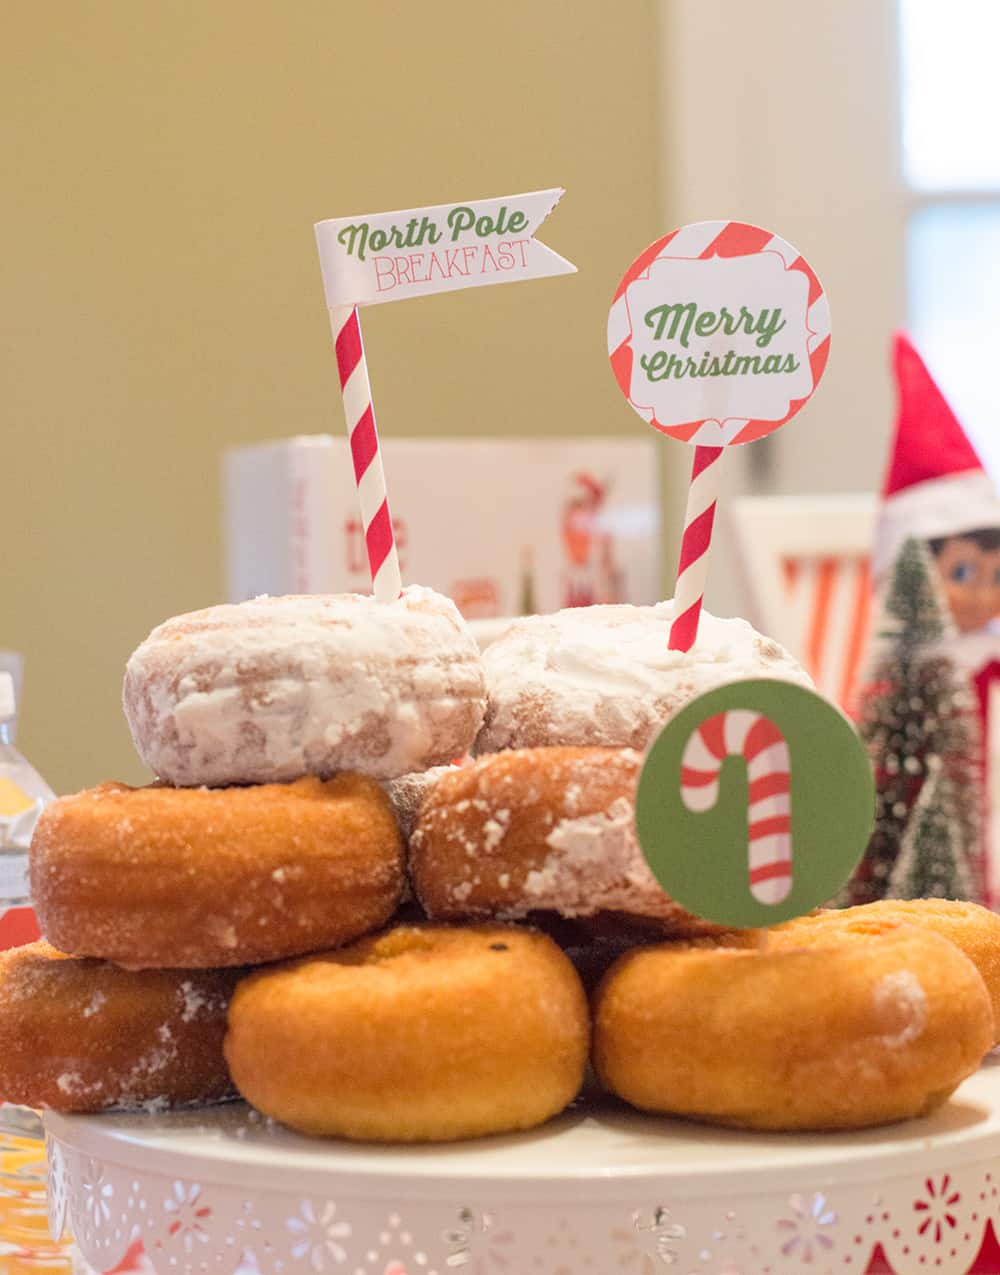 Snow Capped Donut Tower at the Elf on the Shelf North Pole Breakfast by Elva M Design Studio